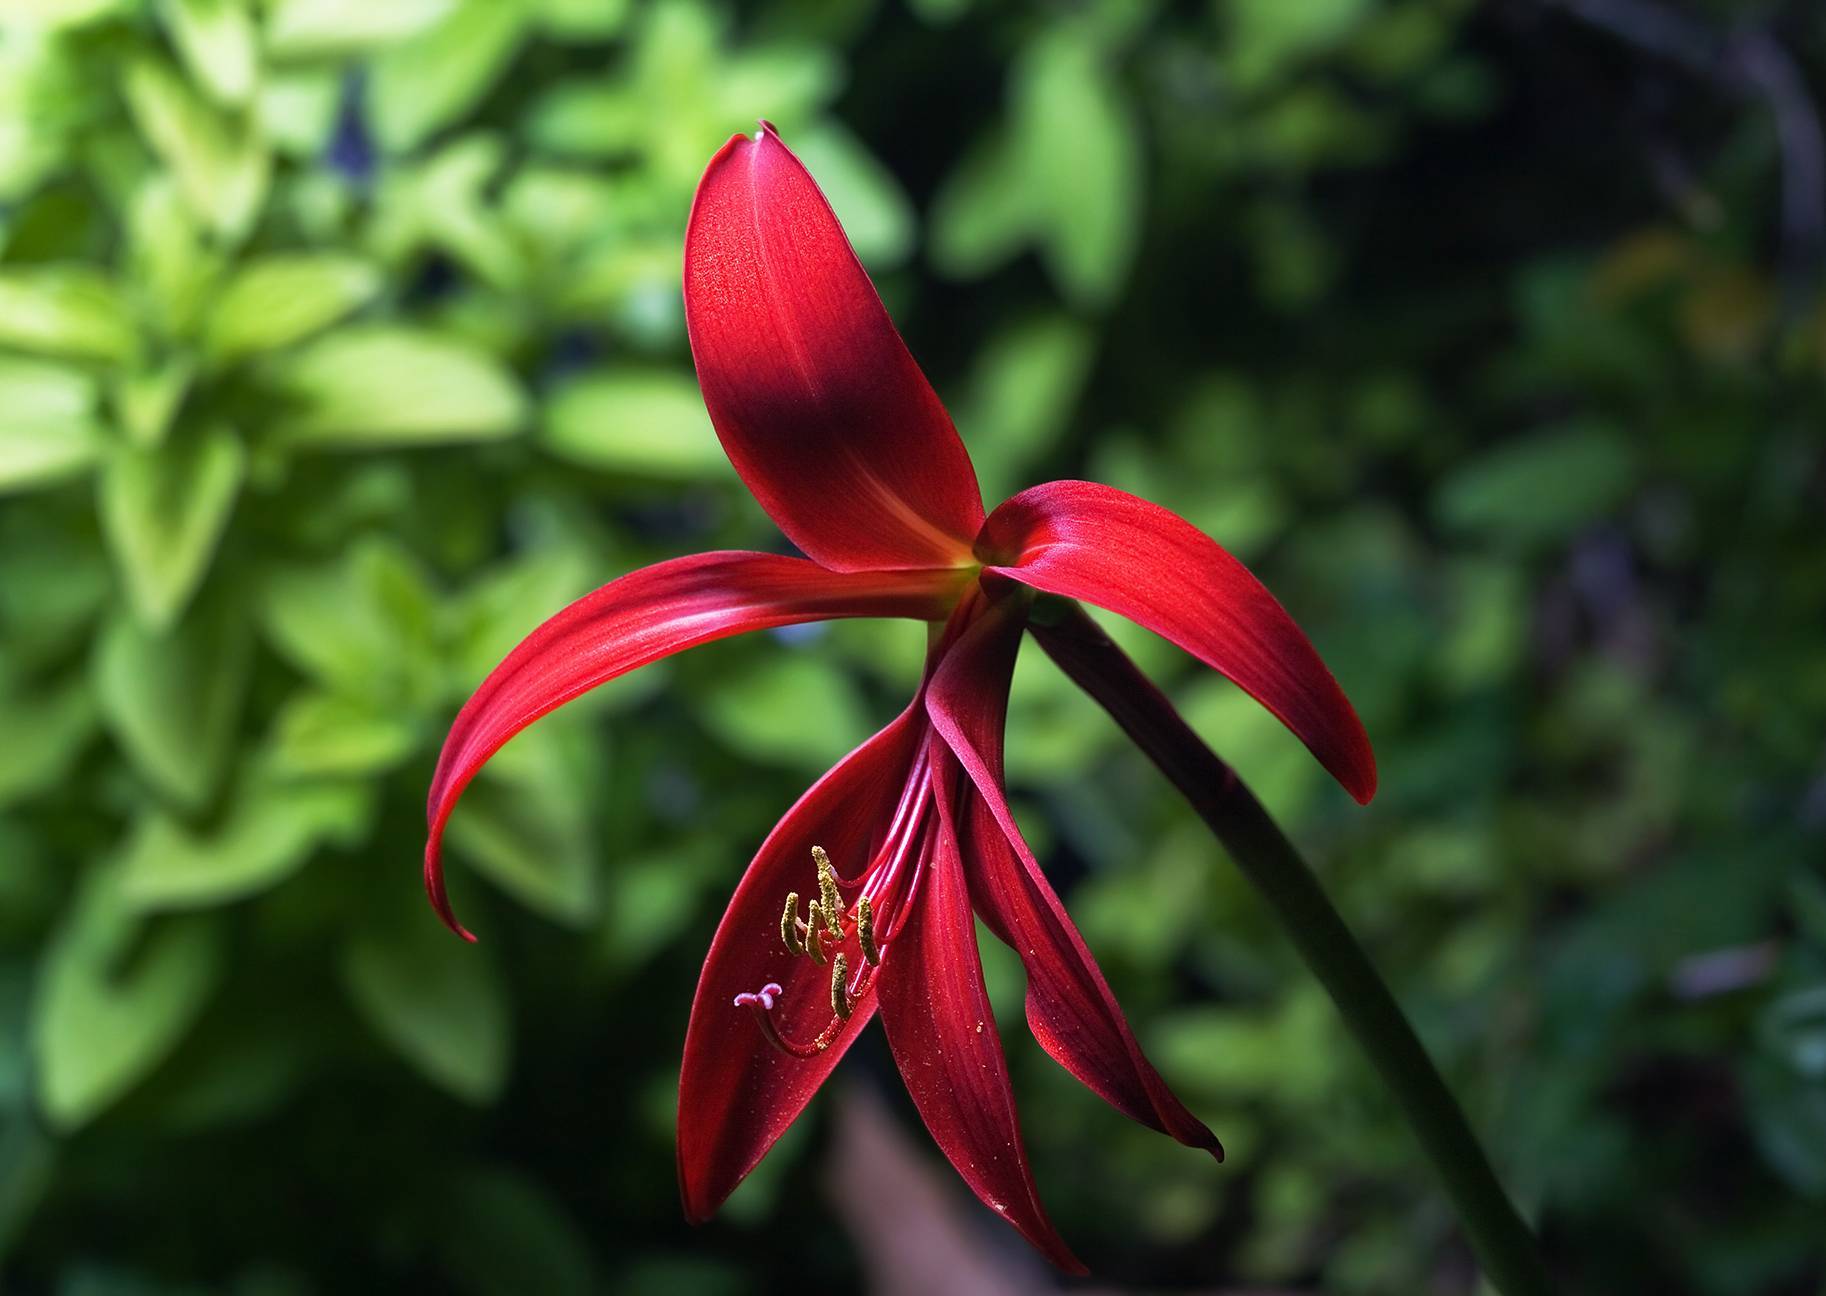 red flower with red filaments, yellow anthers, and brown stem